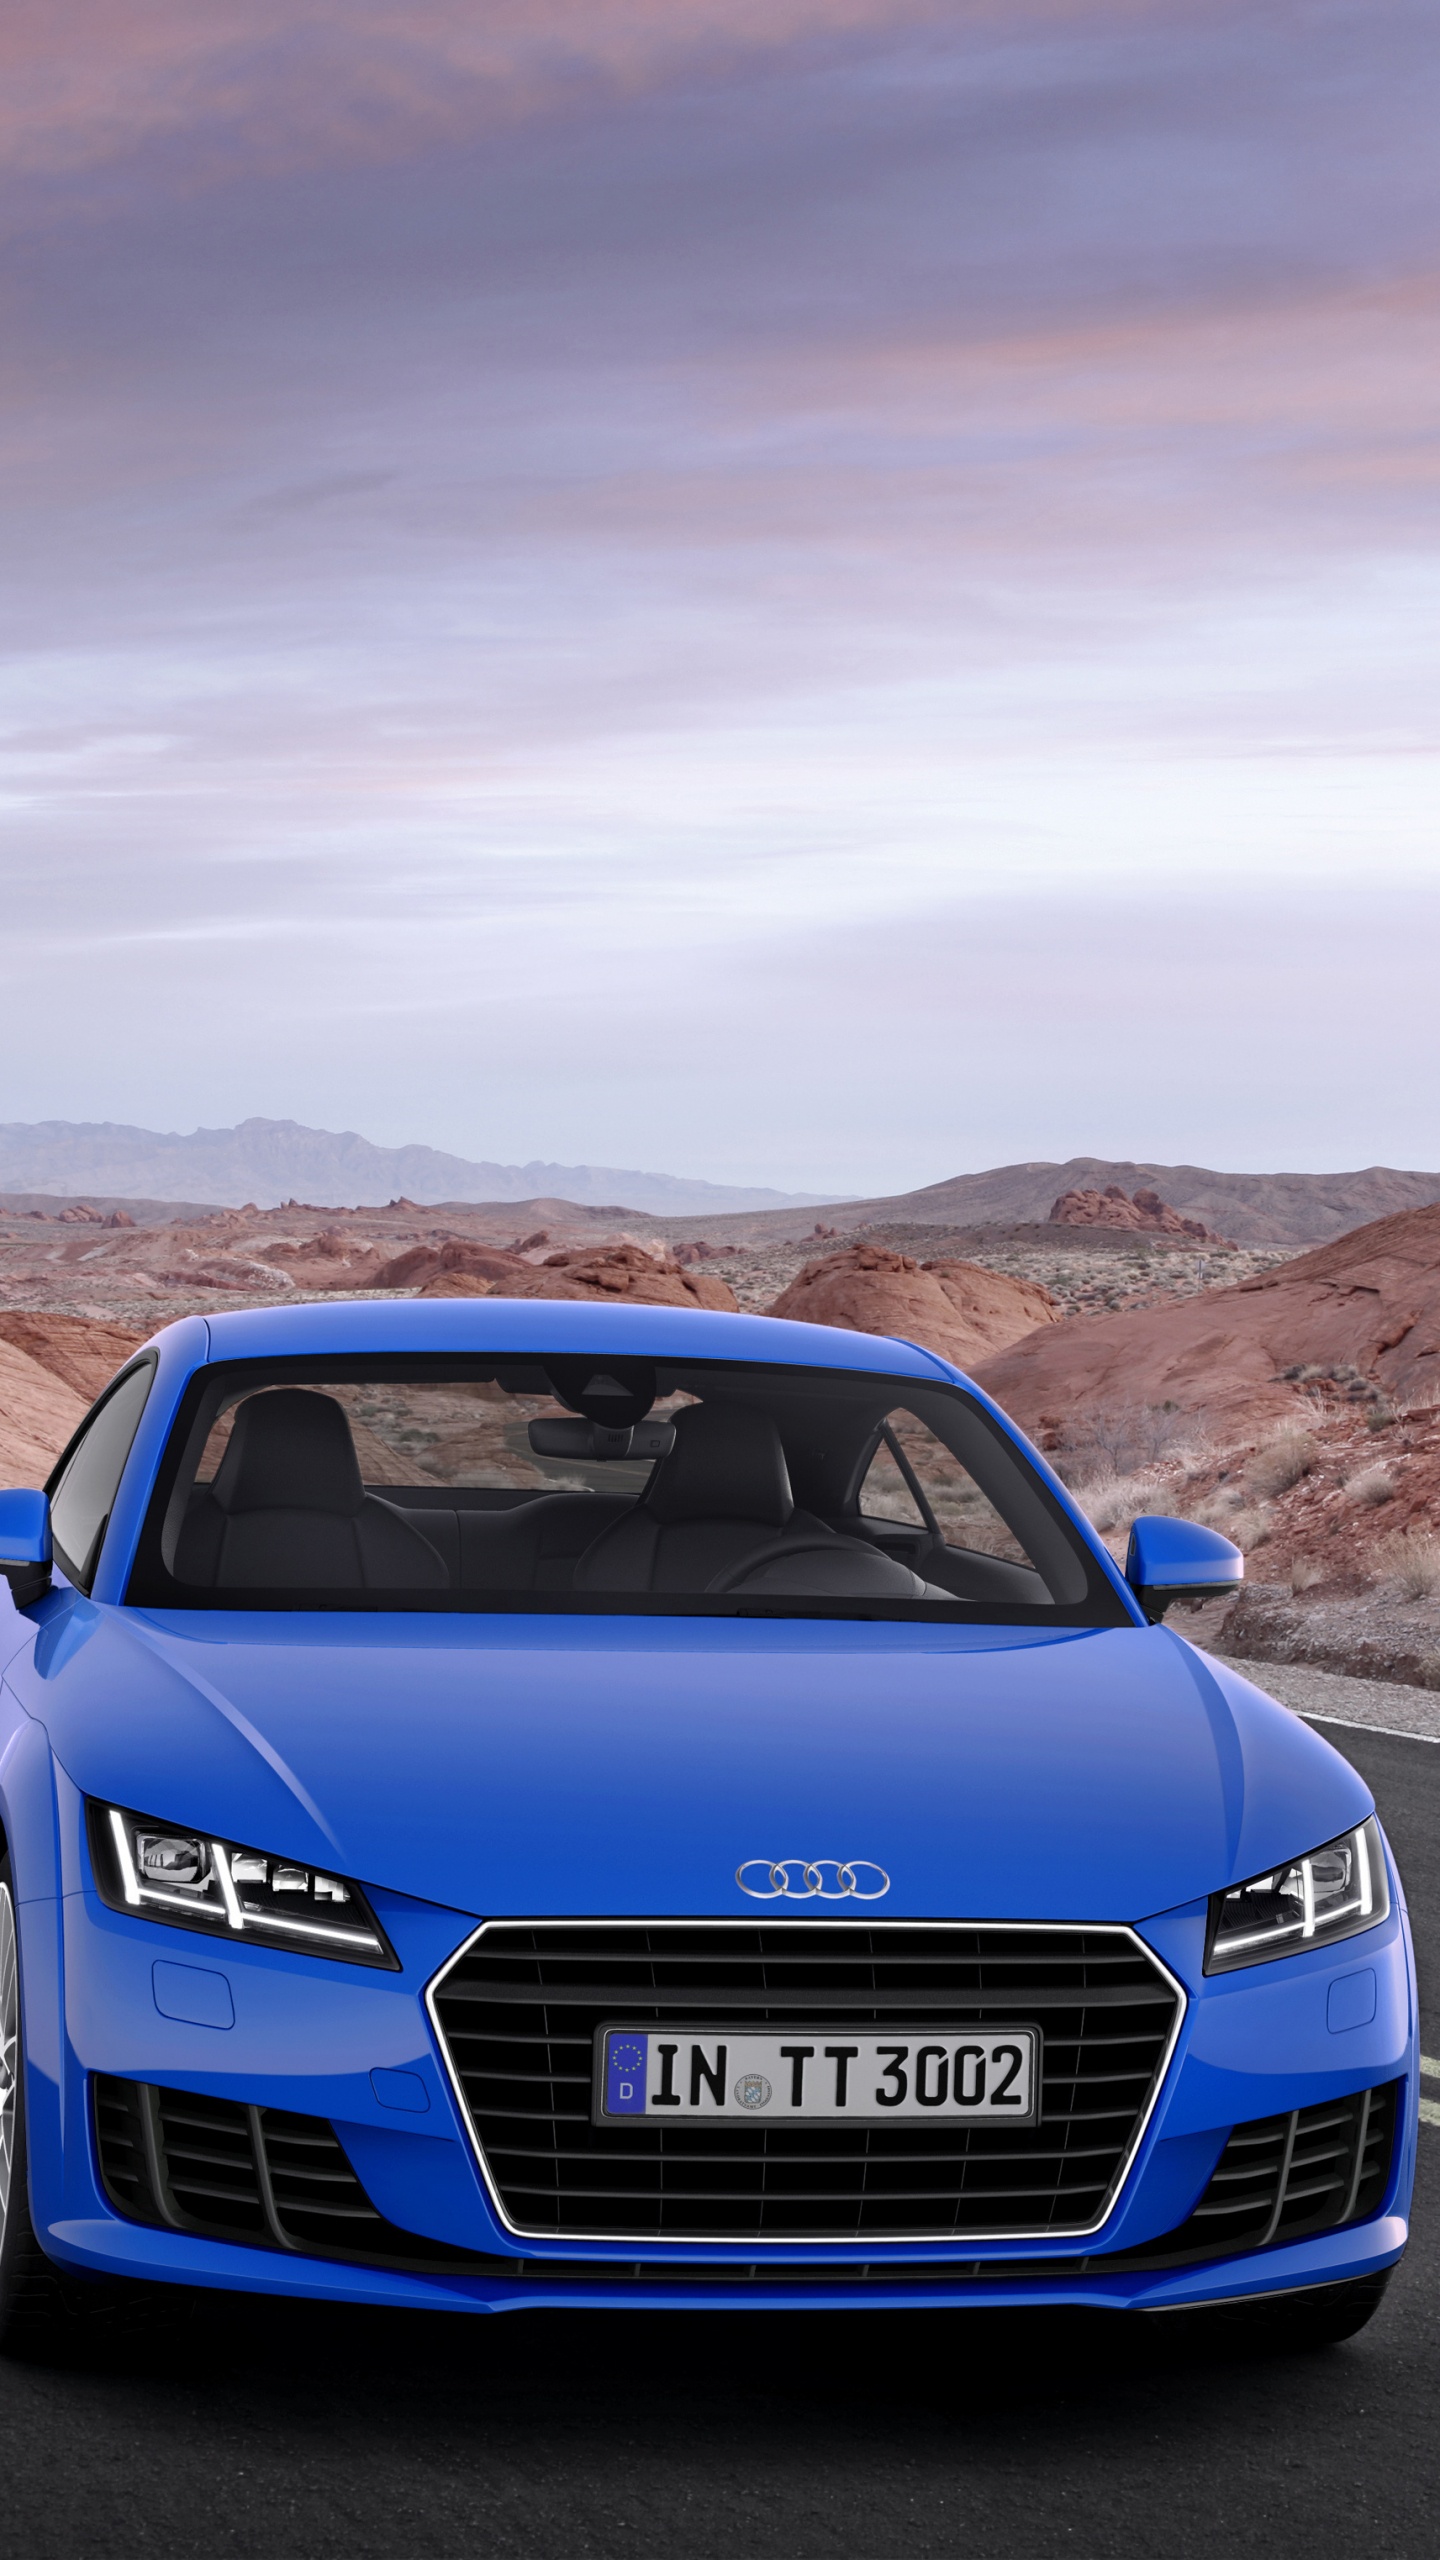 Blue Audi a 4 on Road During Daytime. Wallpaper in 1440x2560 Resolution